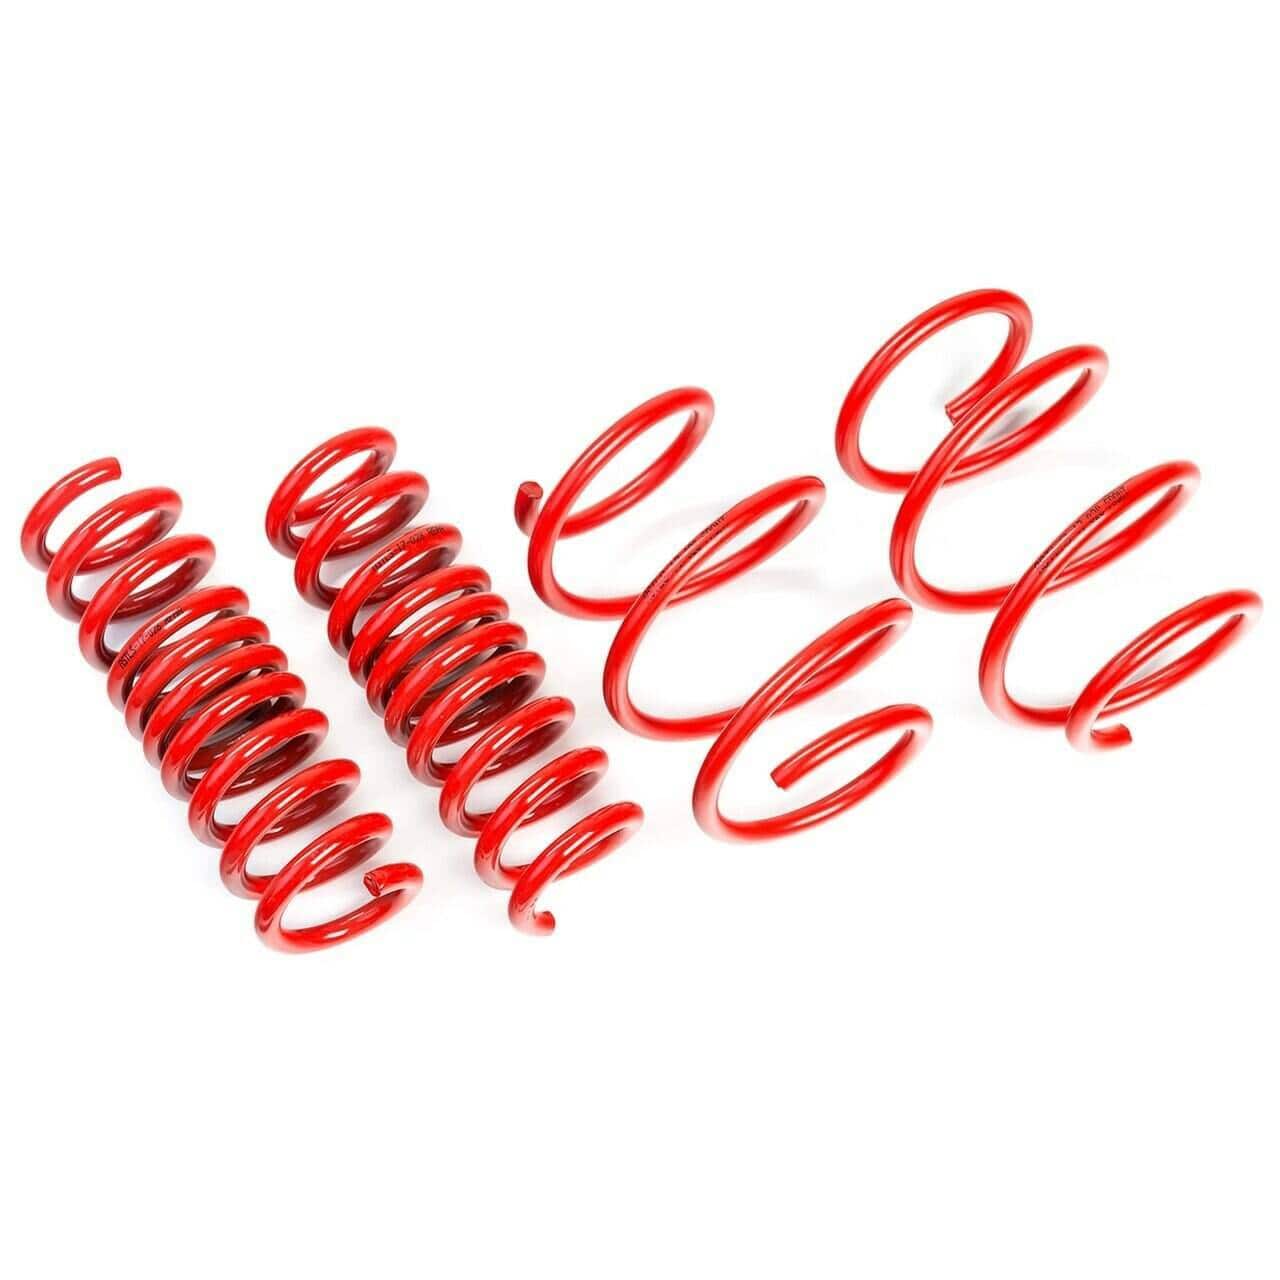 JCW Sport suspension with coil springs in Red